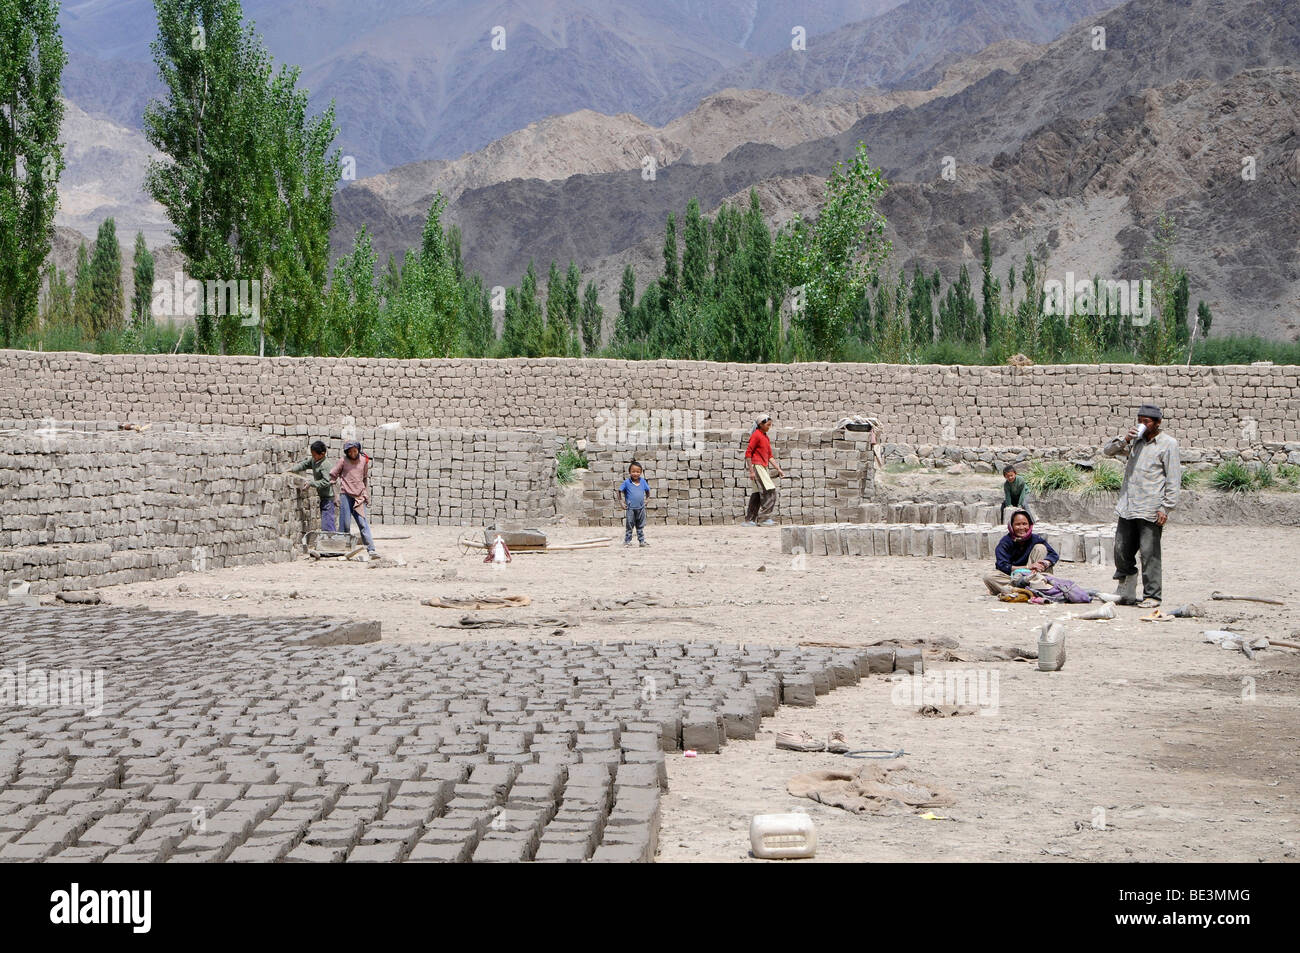 Brickyard which manufactures air-dried clay bricks in the Indus valley, Traktok, Ladakh, India, Himalayas, Asia Stock Photo